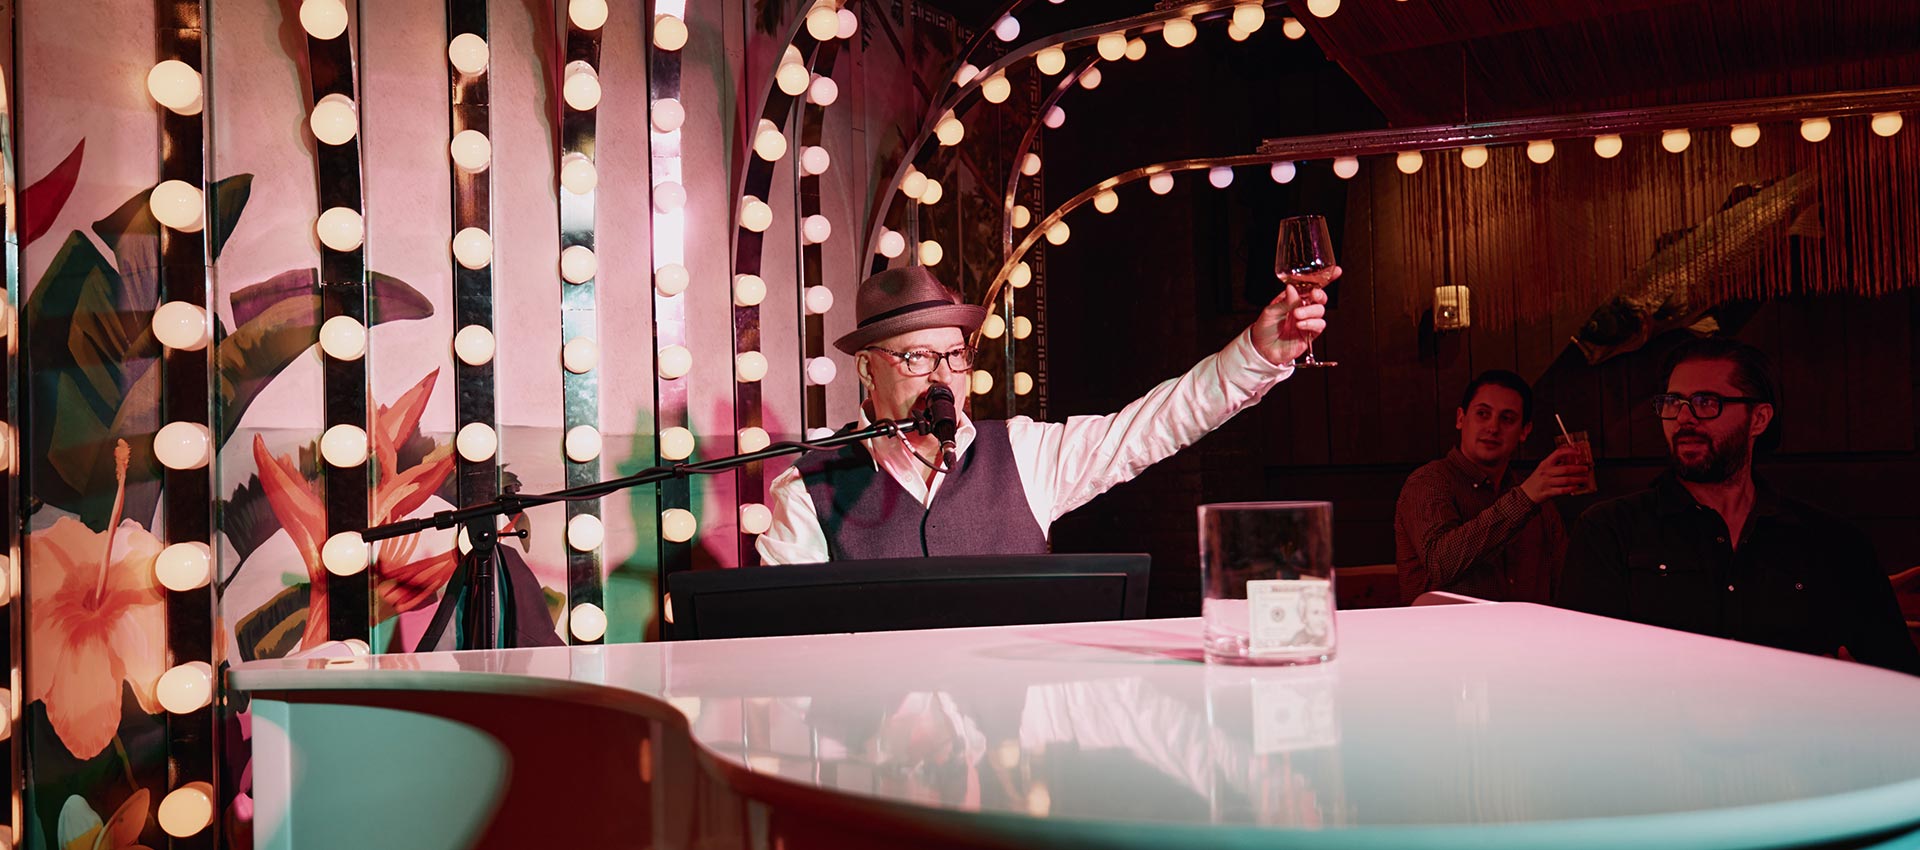 NYC Pianist toasting to the crowd at a Tiki Bar in New York City.